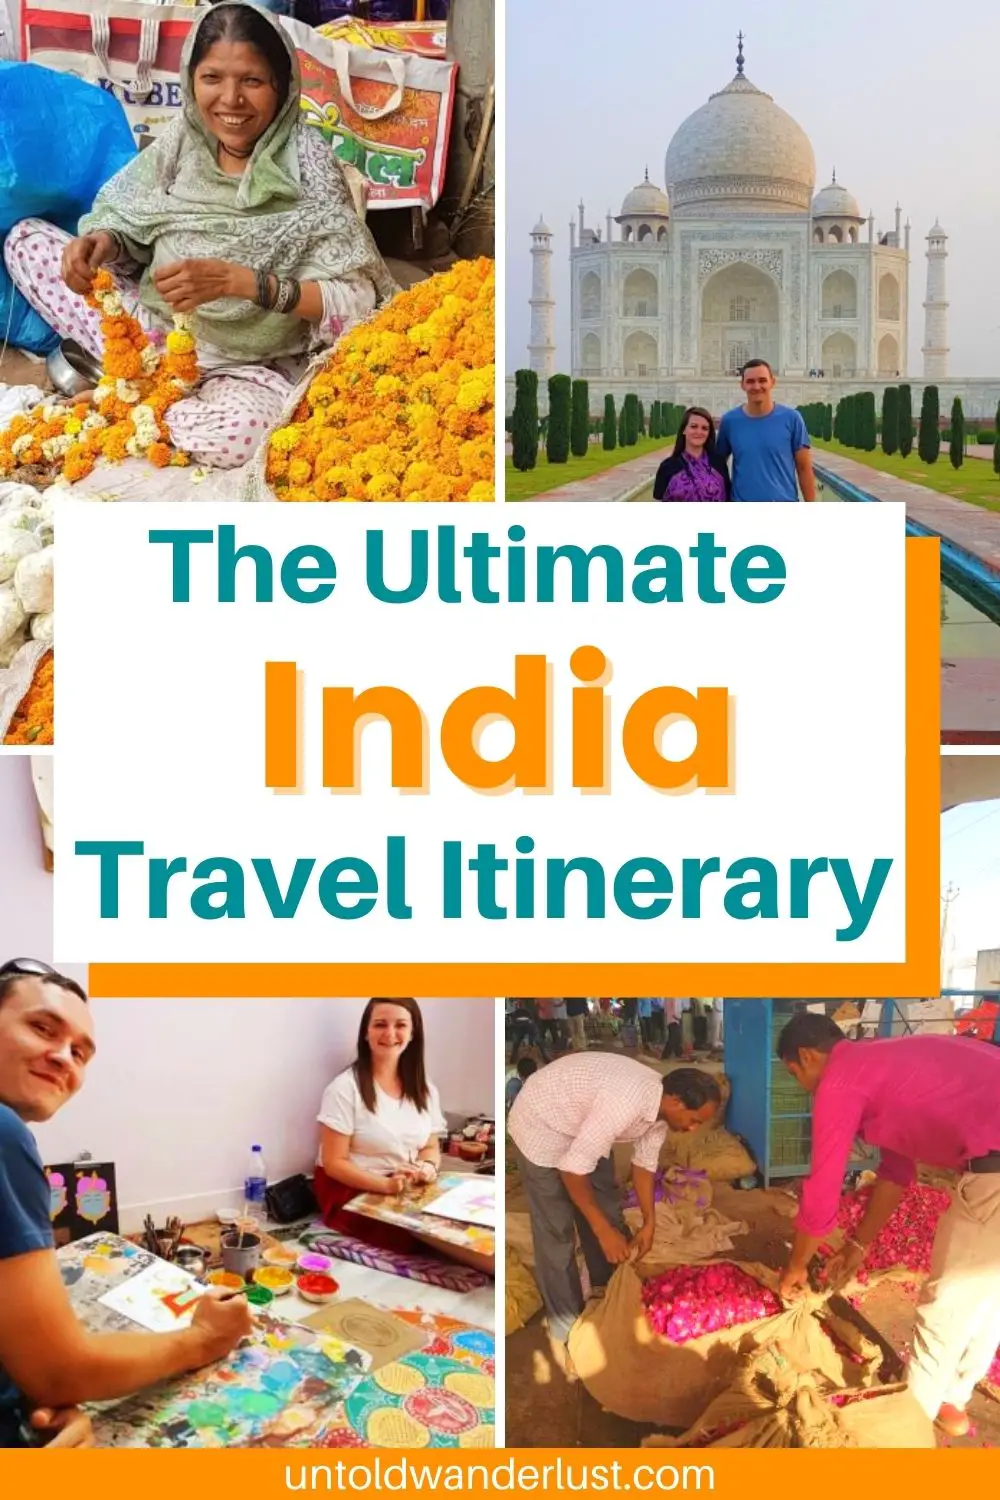 The Best India Travel Itinerary for First-Timers